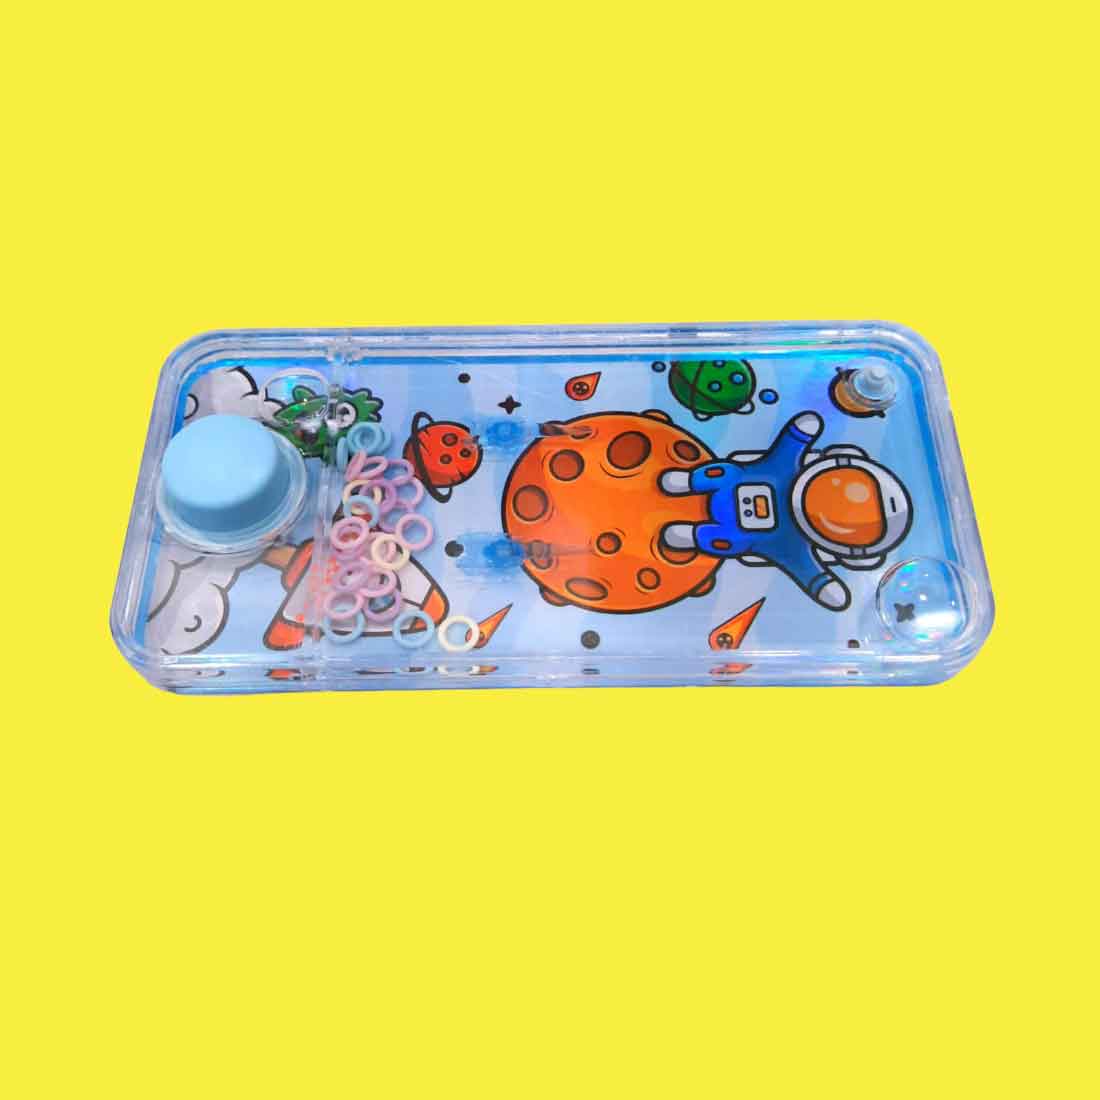 Kids Handheld Phone Toys Water Ring Toss Game Child Interactive Game Toy  Gift | eBay